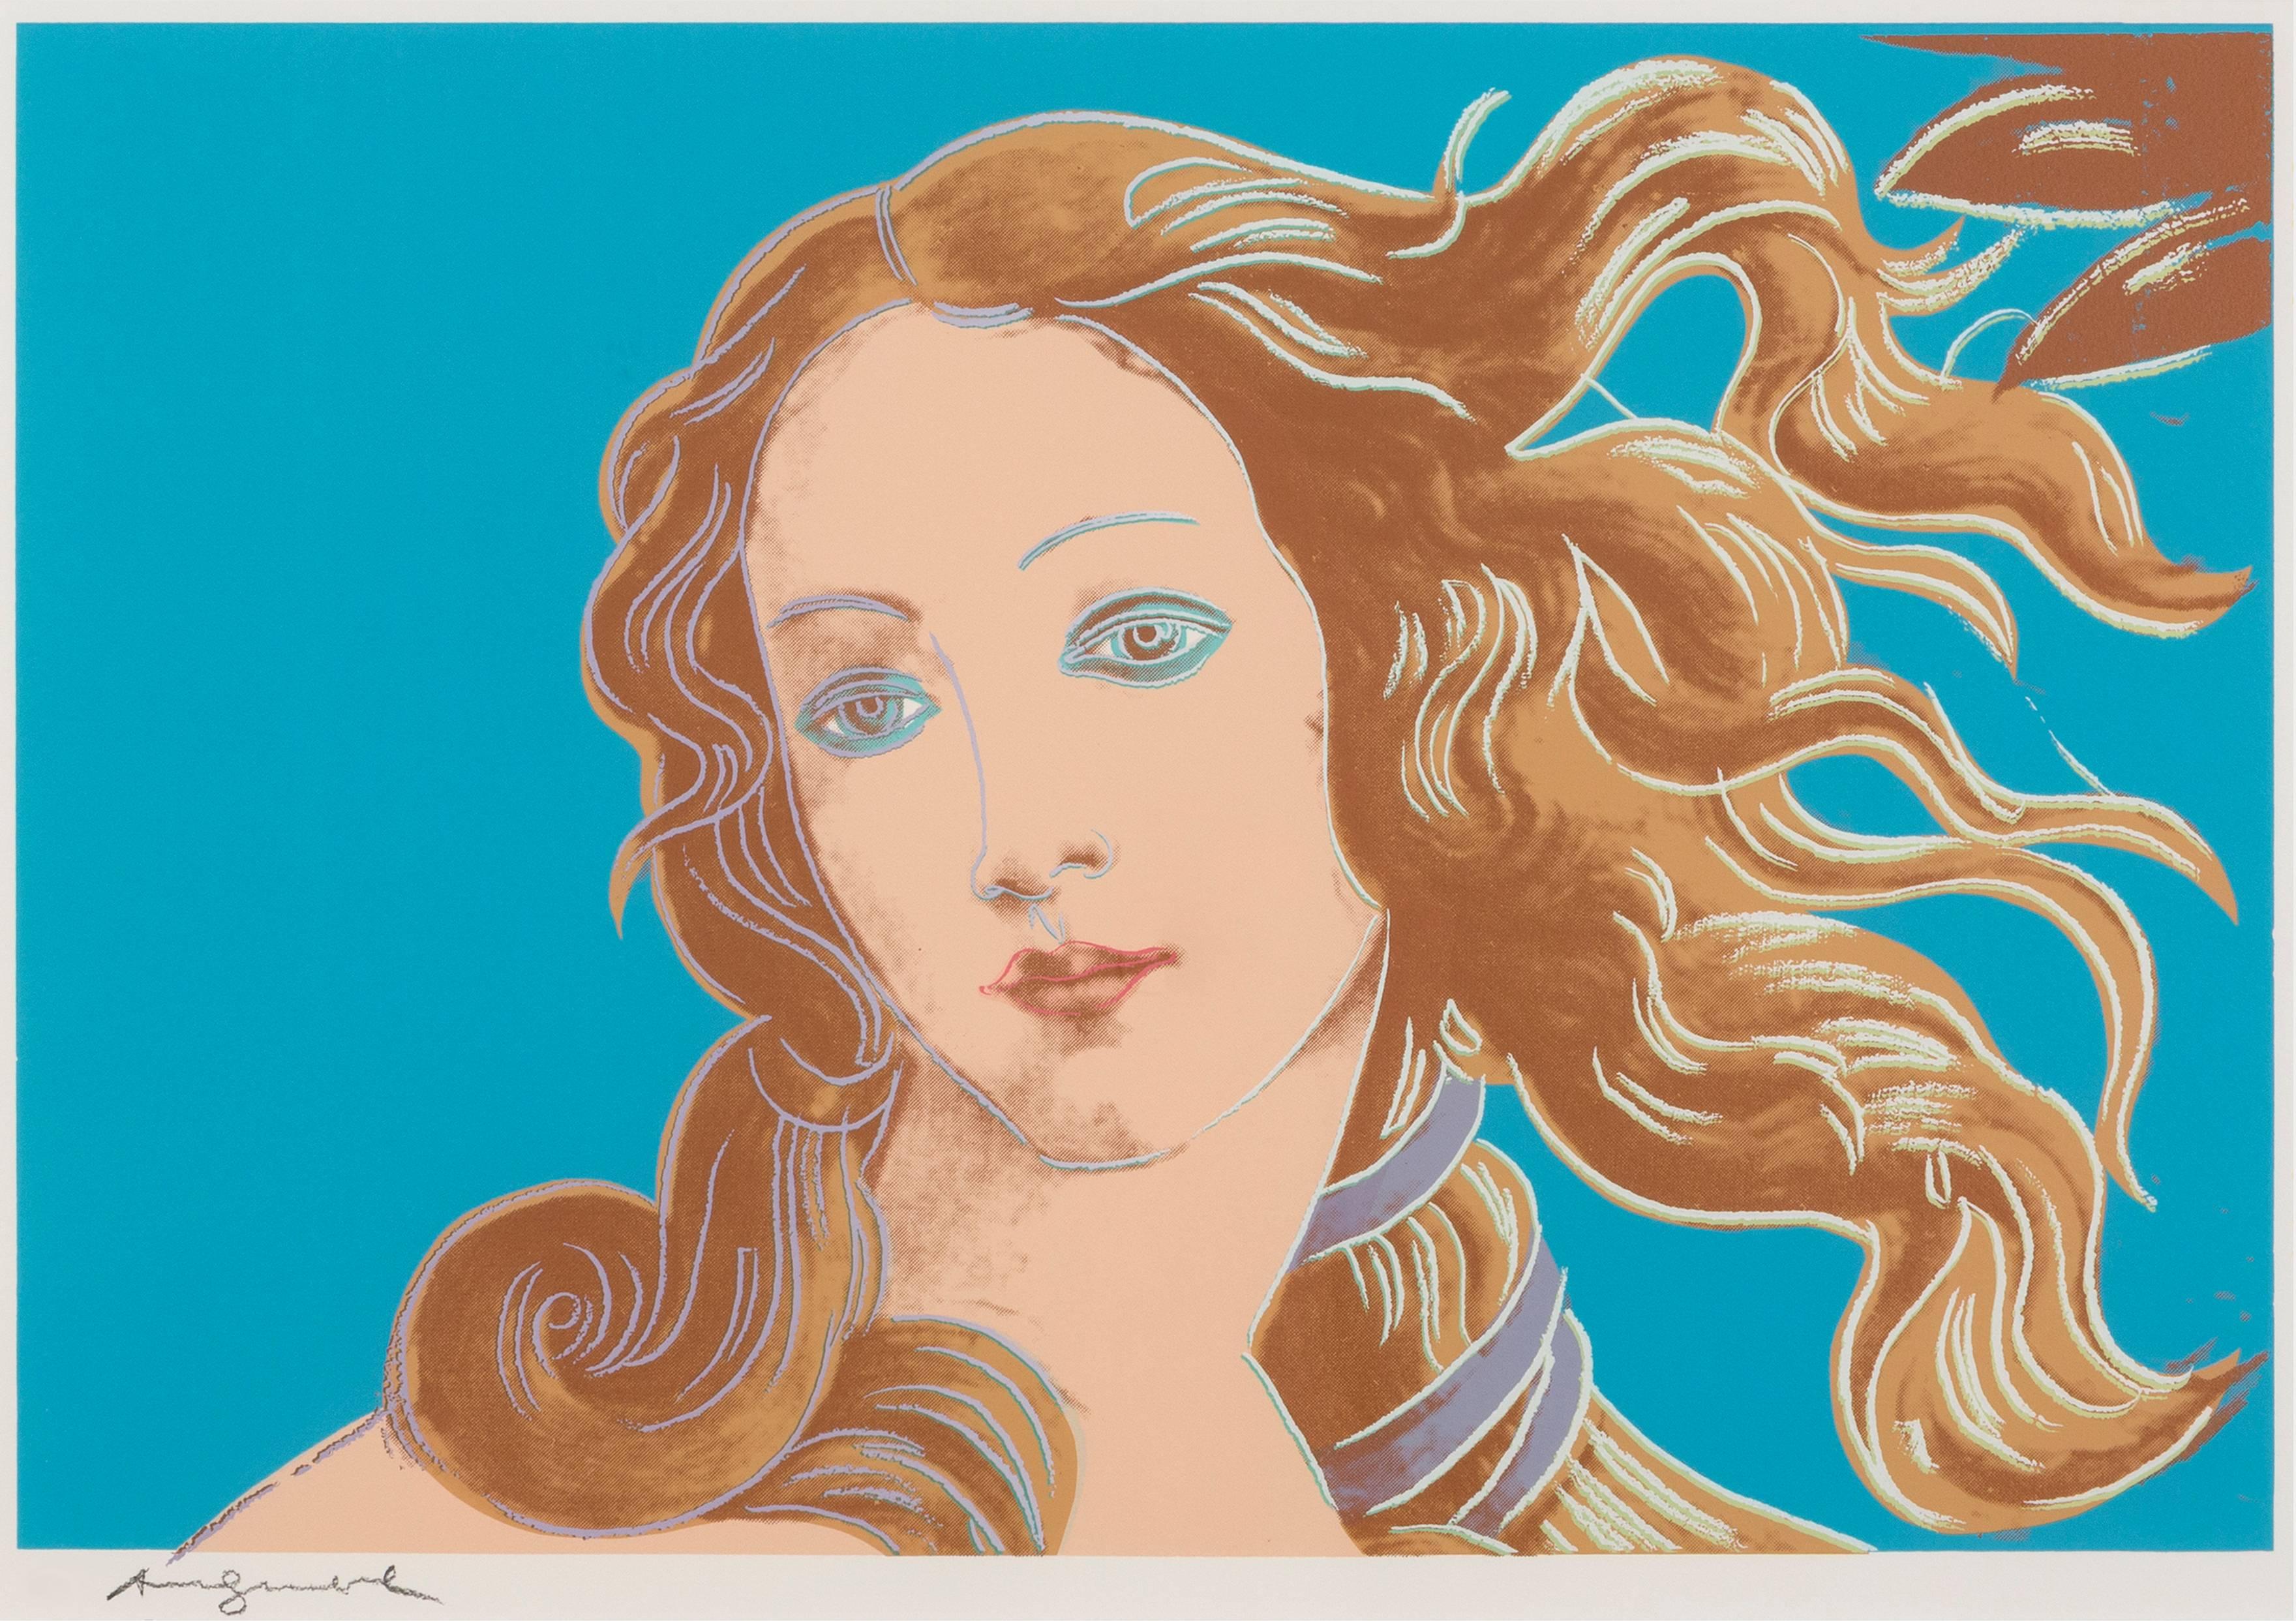 Details of Renaissance paintings (Sandro Botticelli, Birth of Venus, 1482) - Print by Andy Warhol